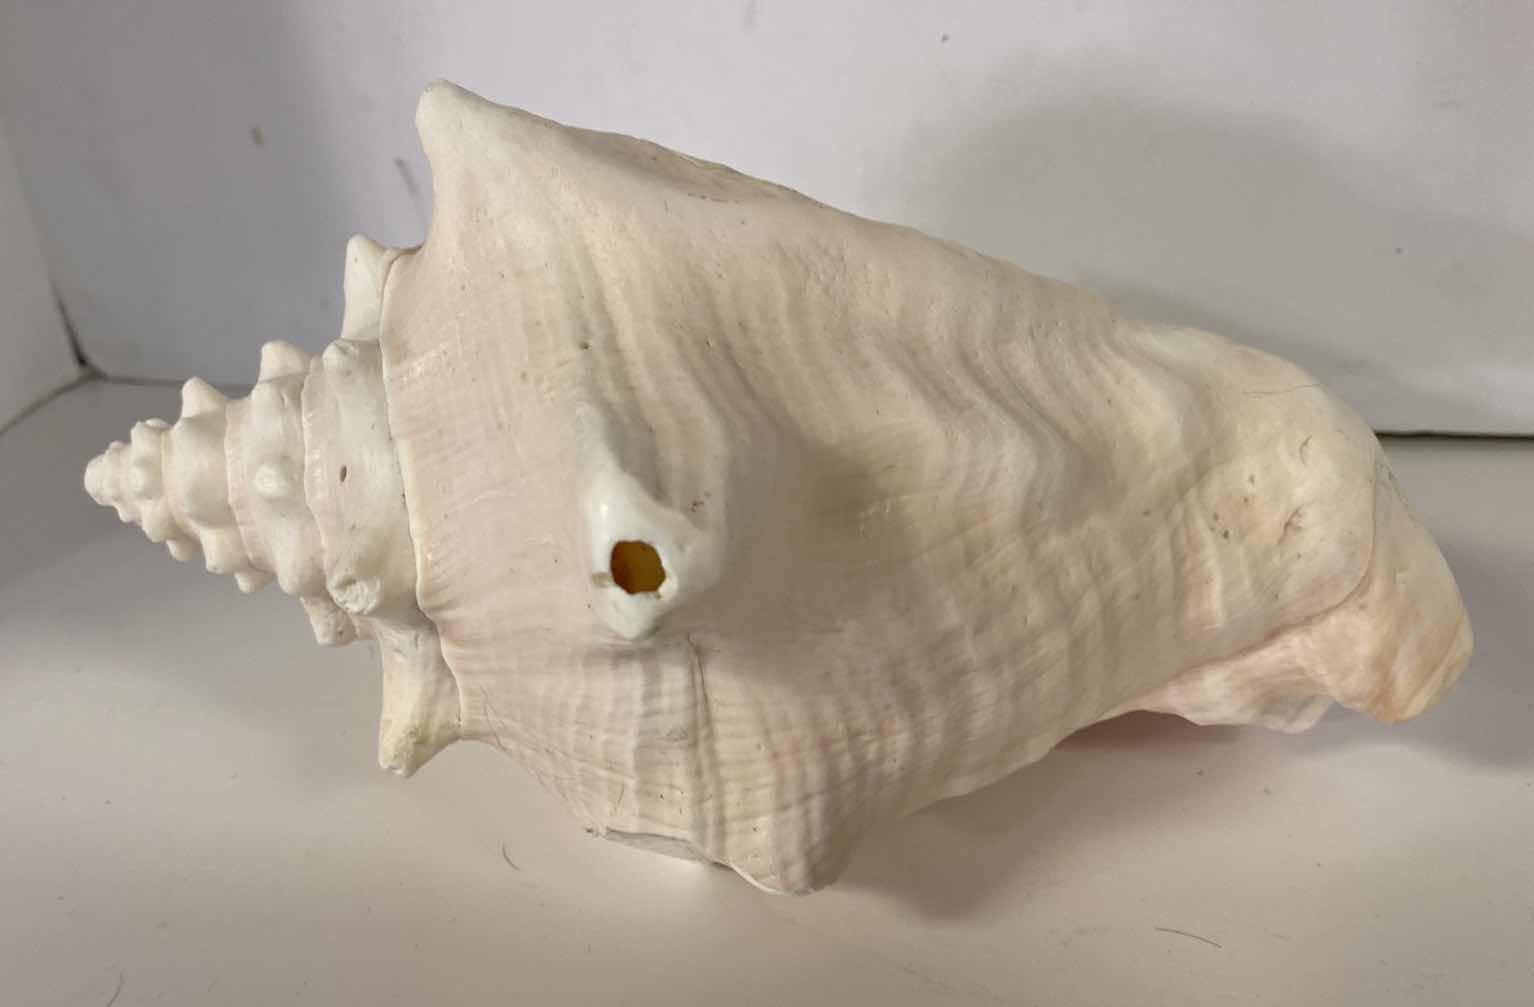 Photo 3 of LARGE QUEEN PINK CONCH SHELL 10”